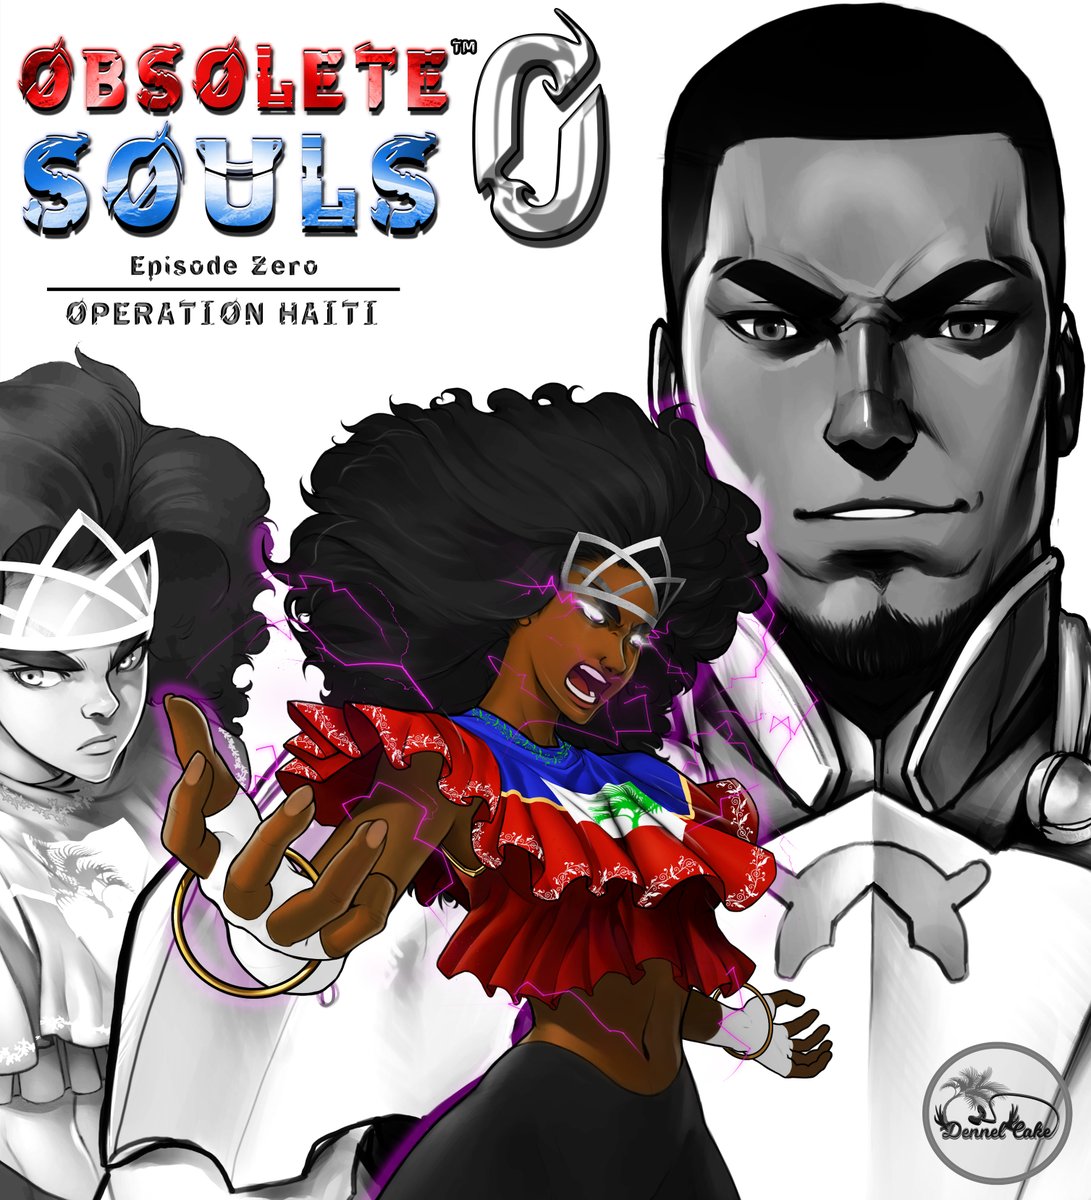 Obsolete Souls Episode 0 sets the stage for our upcoming RPG with a narrative inspired by Haitian history & fantasy lore. Support this Haitian representation in gaming via Kickstarter! hprs.co/obsolete #screenshotsaturday #gamedev #IndieGameDev #indiedev